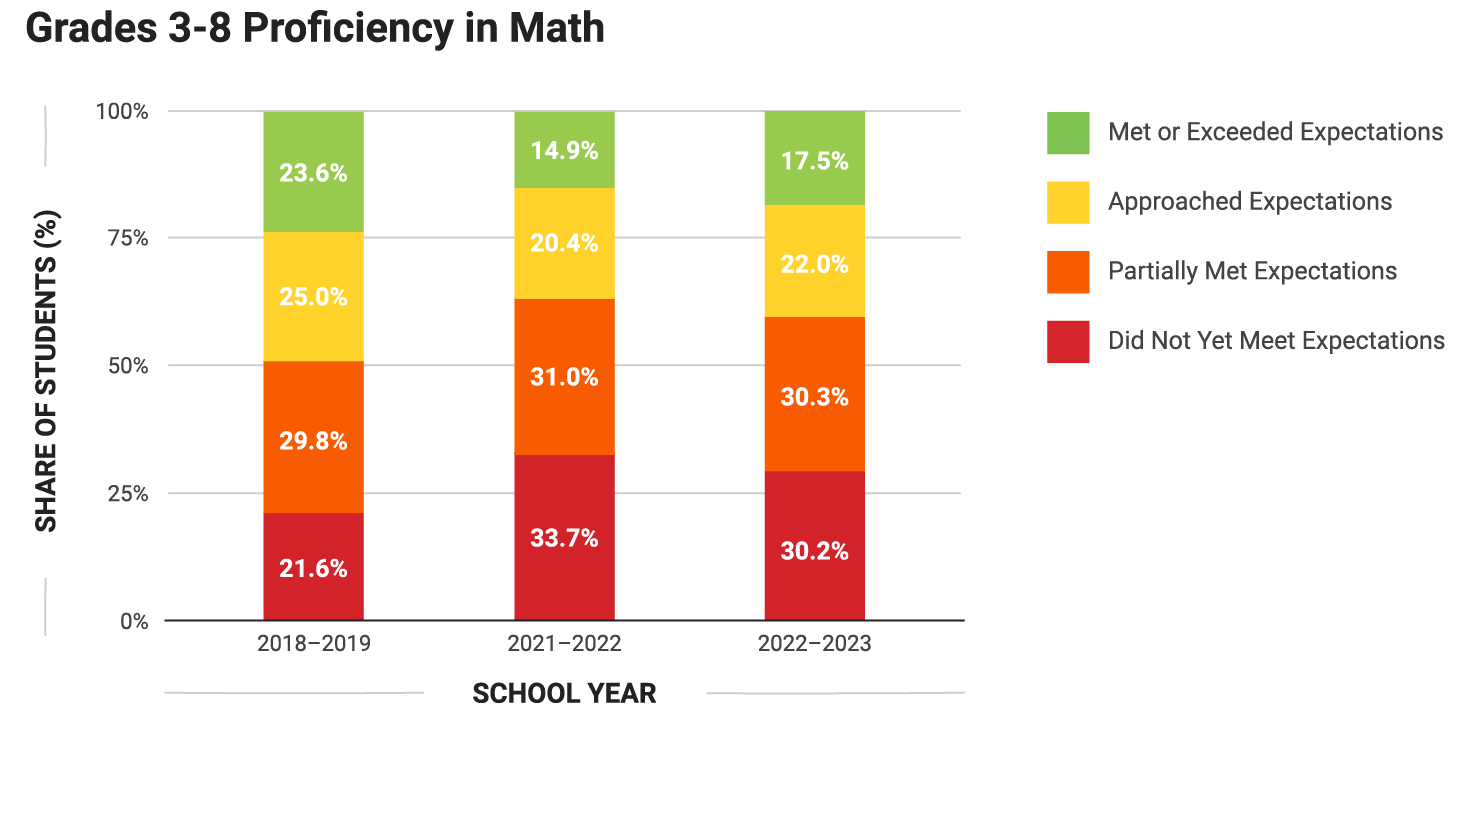 Chart showing proficiency in math